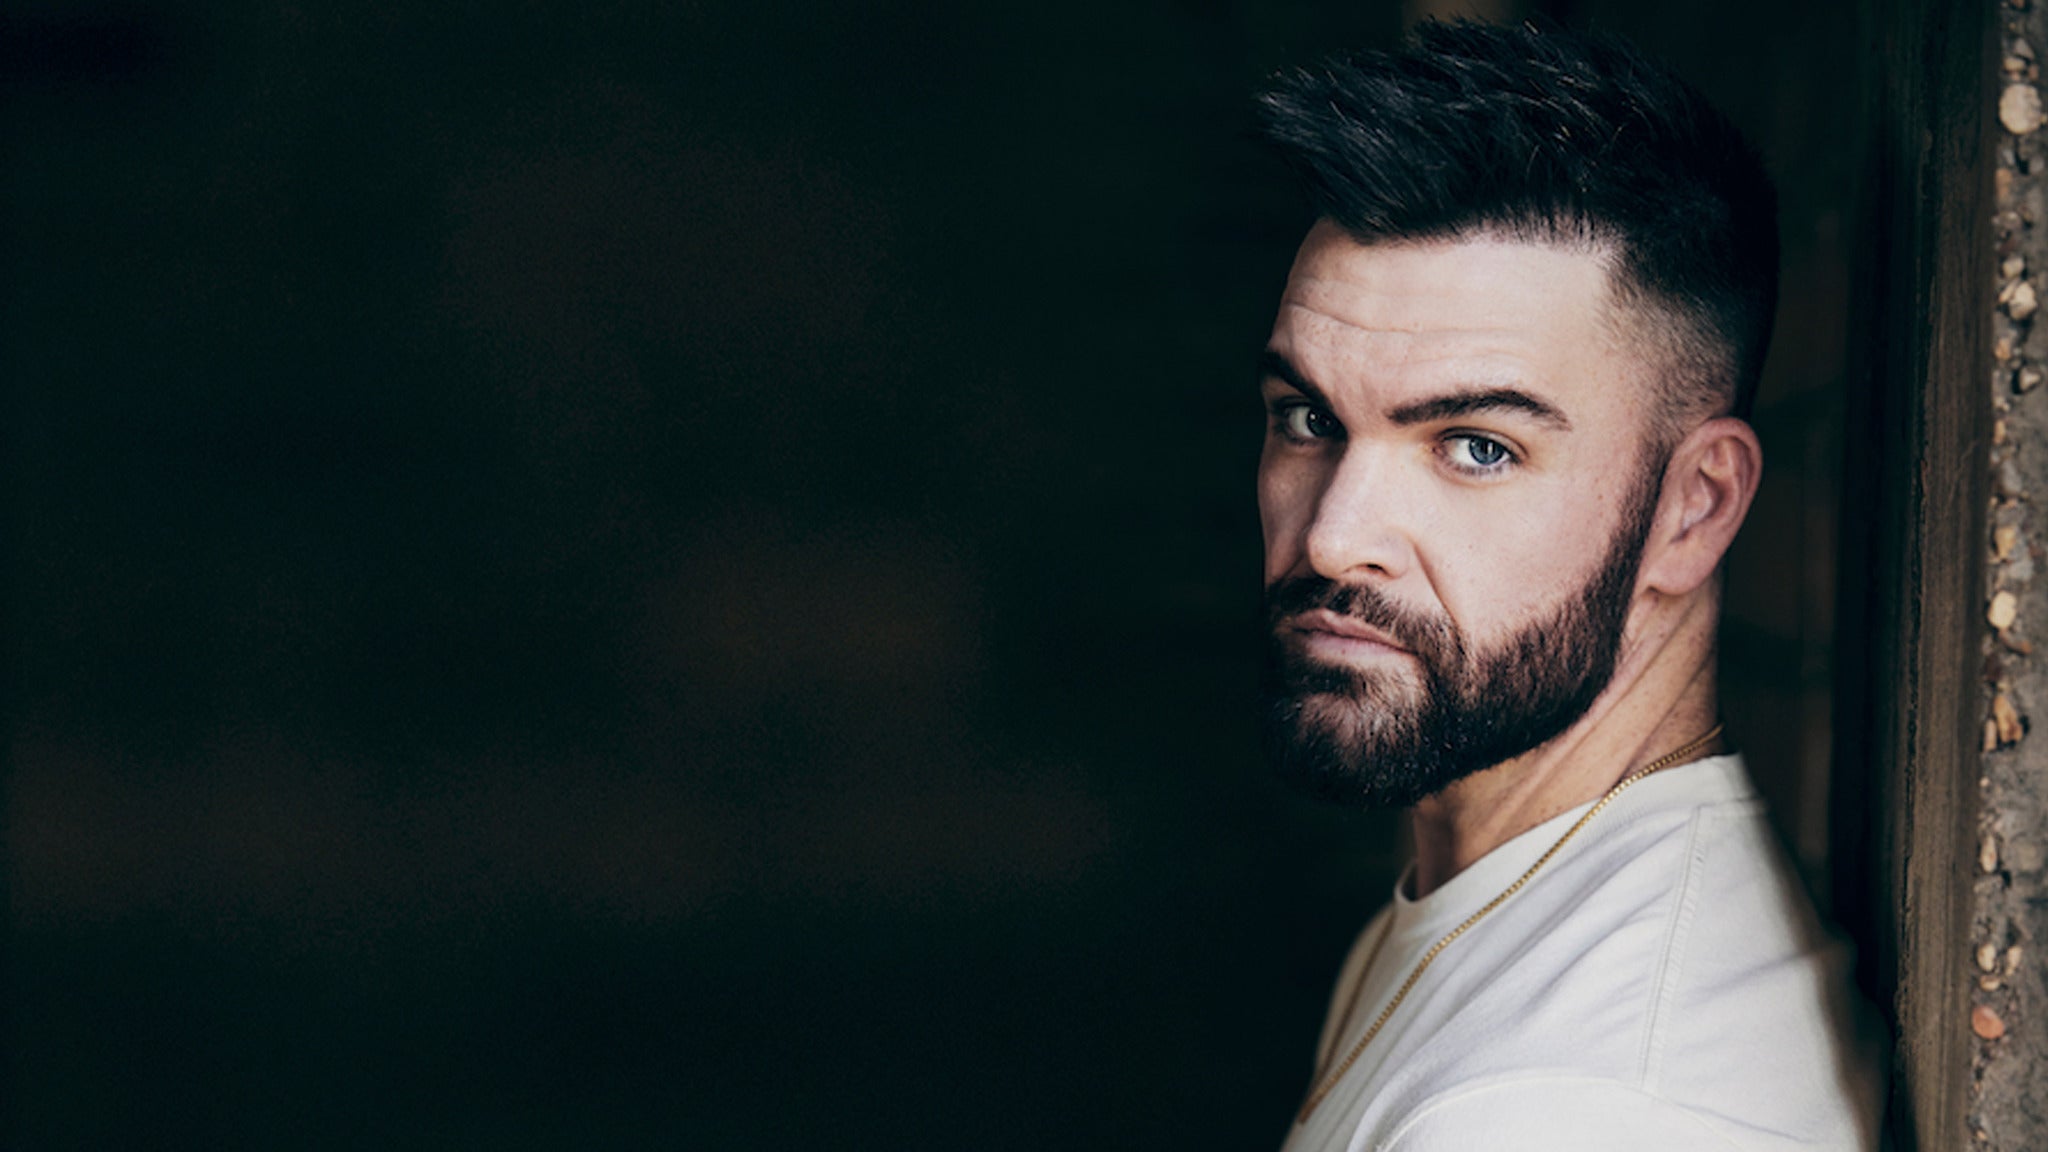 Dylan Scott at Five Flags Center - Dubuque, IA 52001